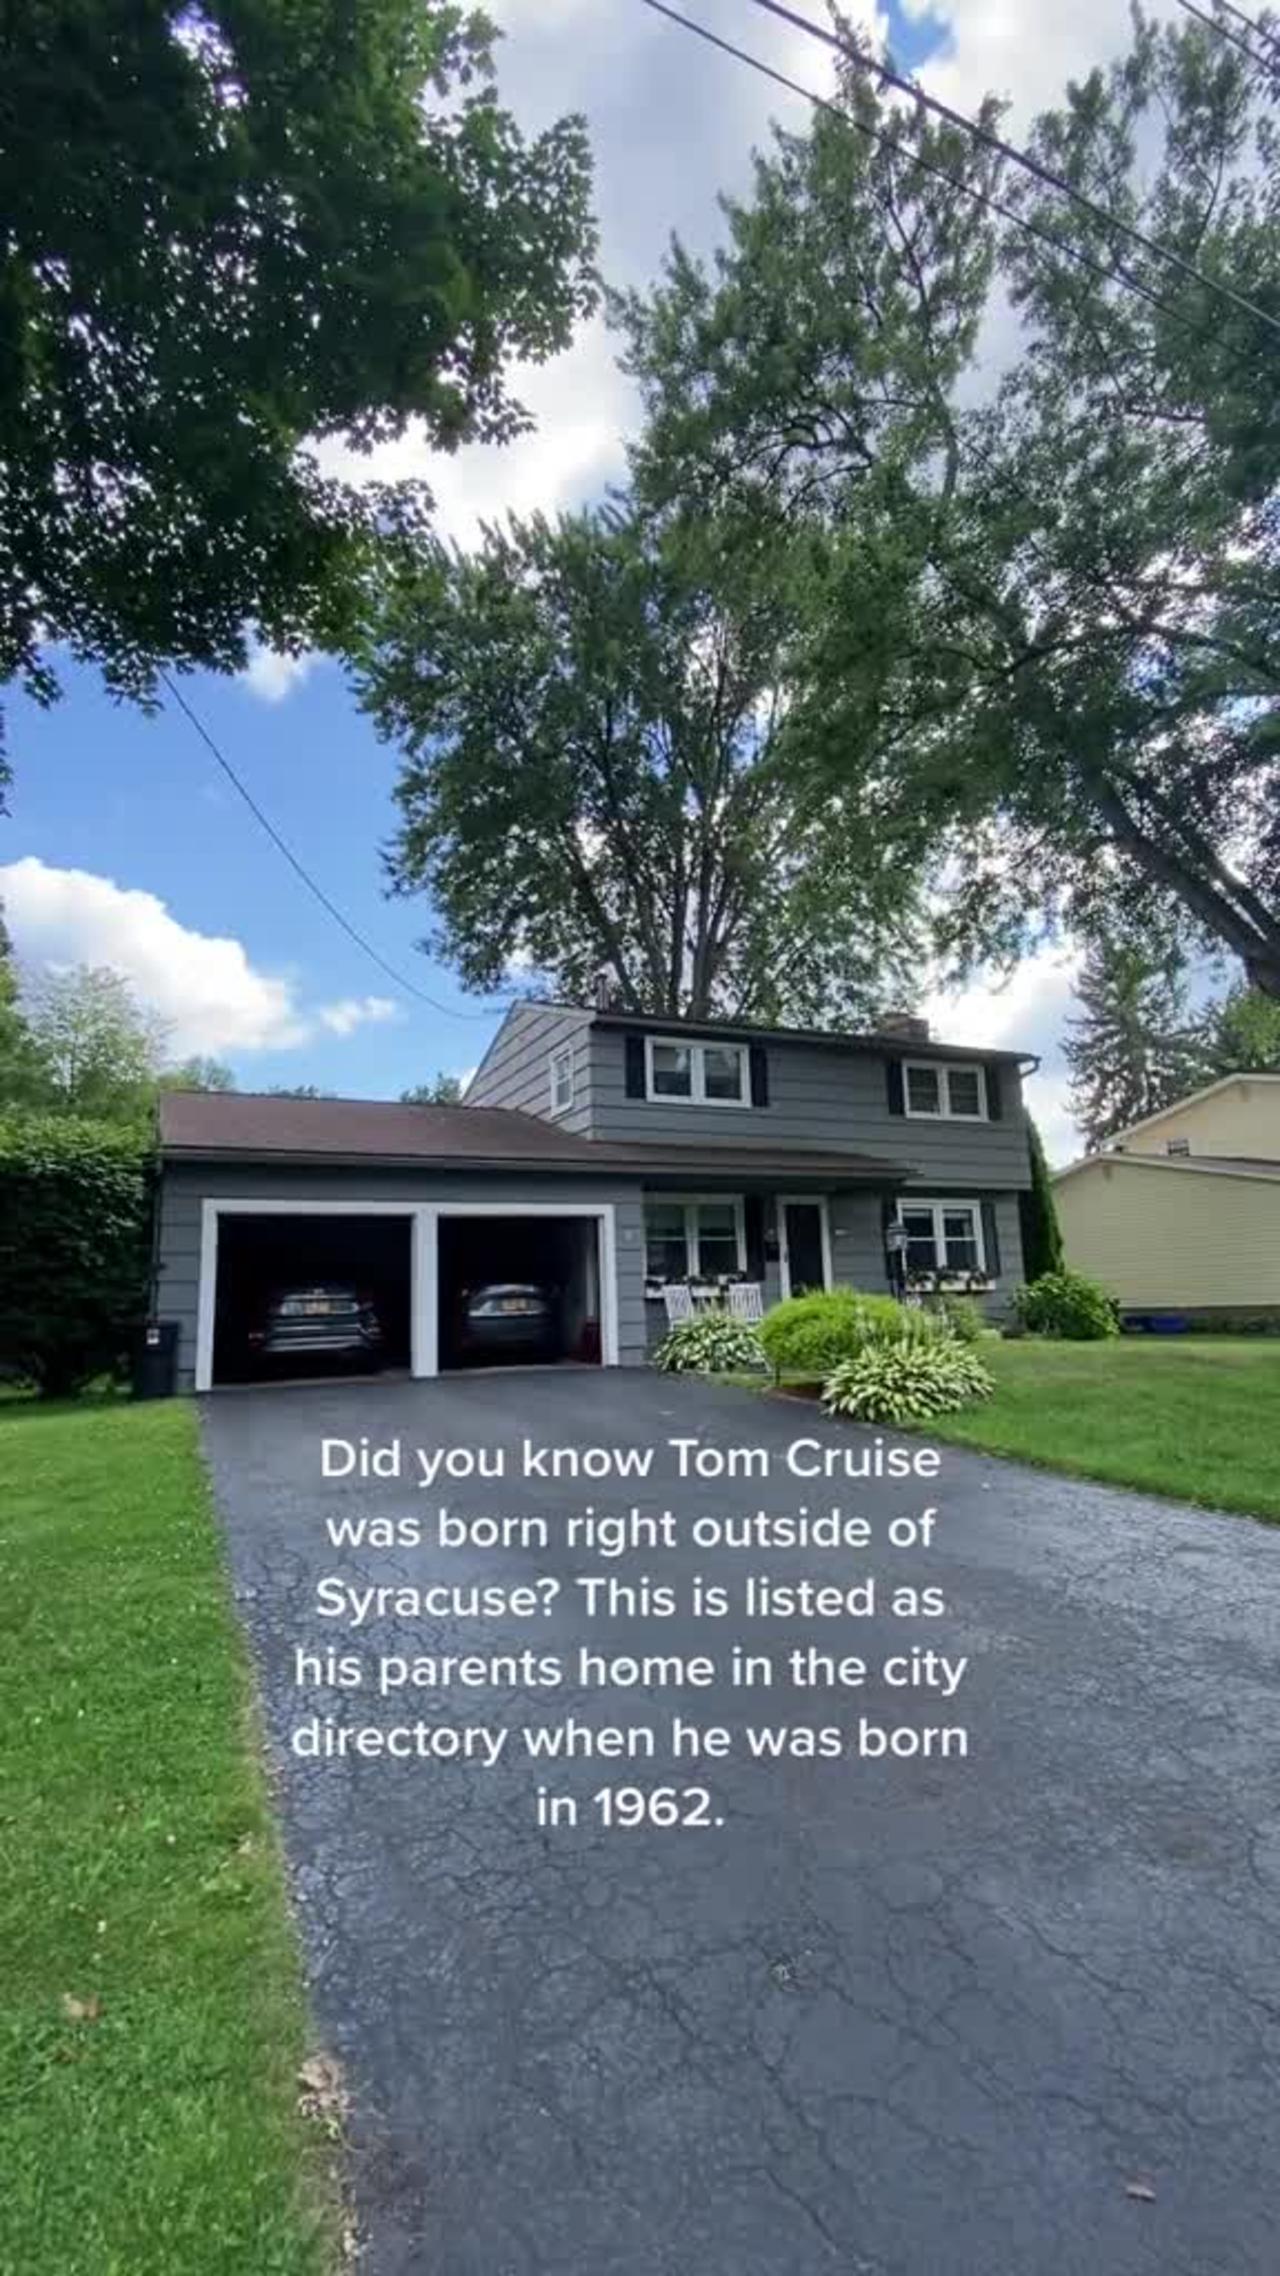 where did tom cruise live in syracuse